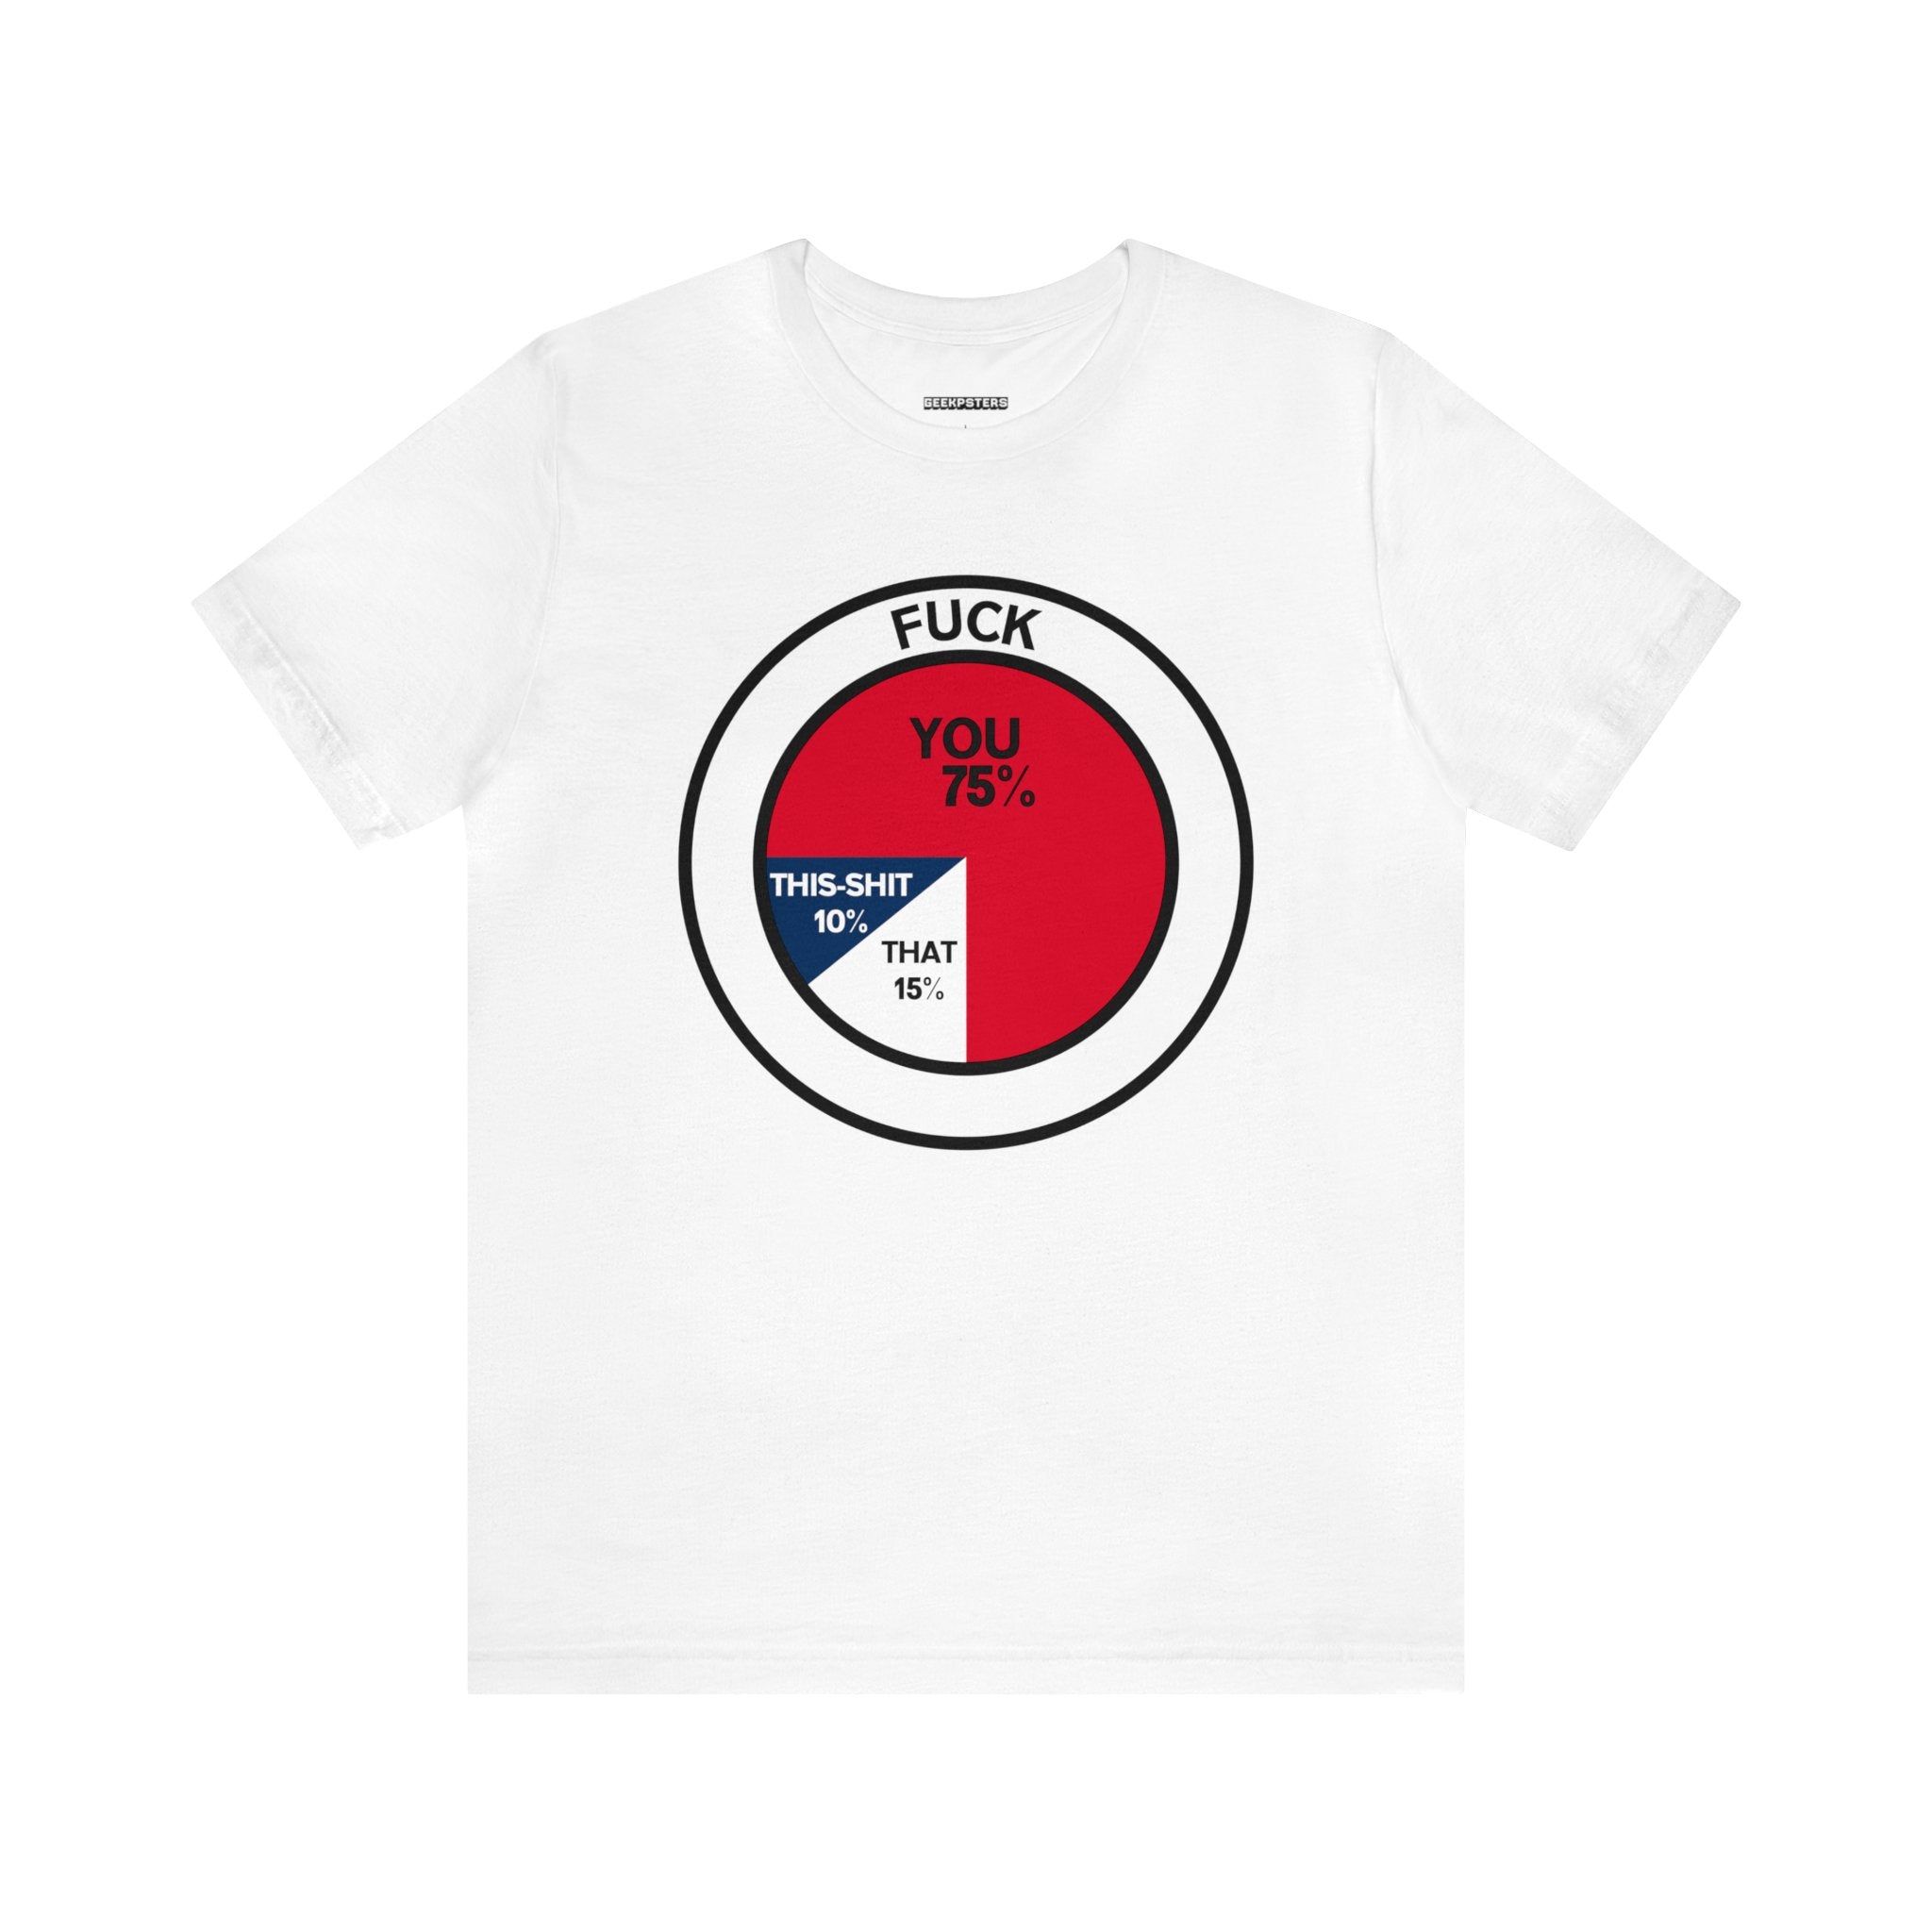 Order a True Statistic T-Shirt with a red, blue and white circle on it today.